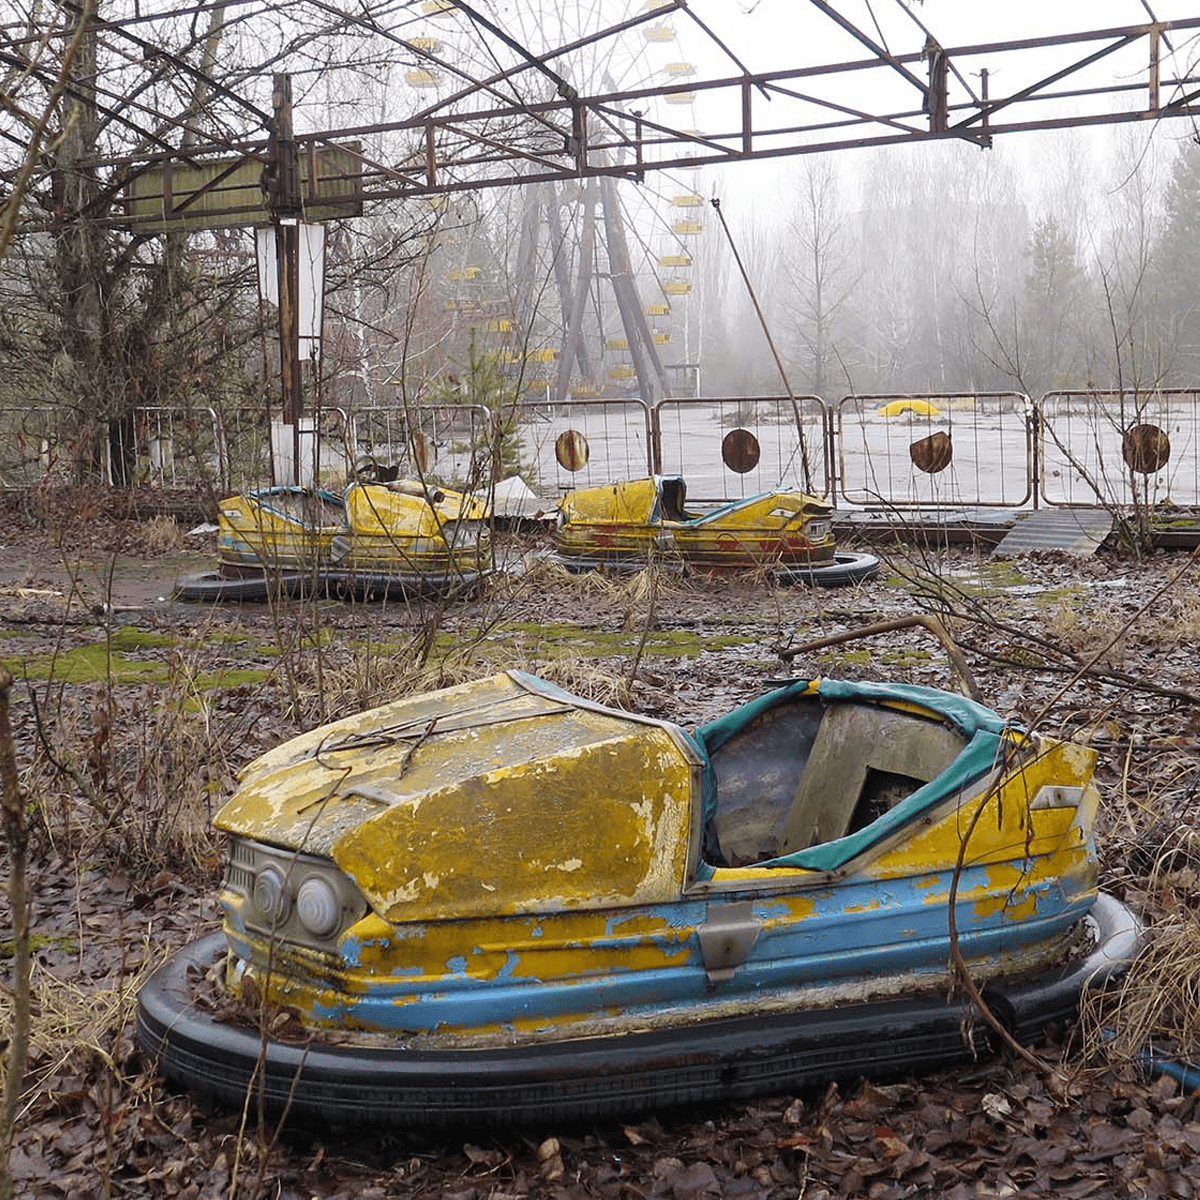 Chernobyl The Chernobyl Nuclear Disaster